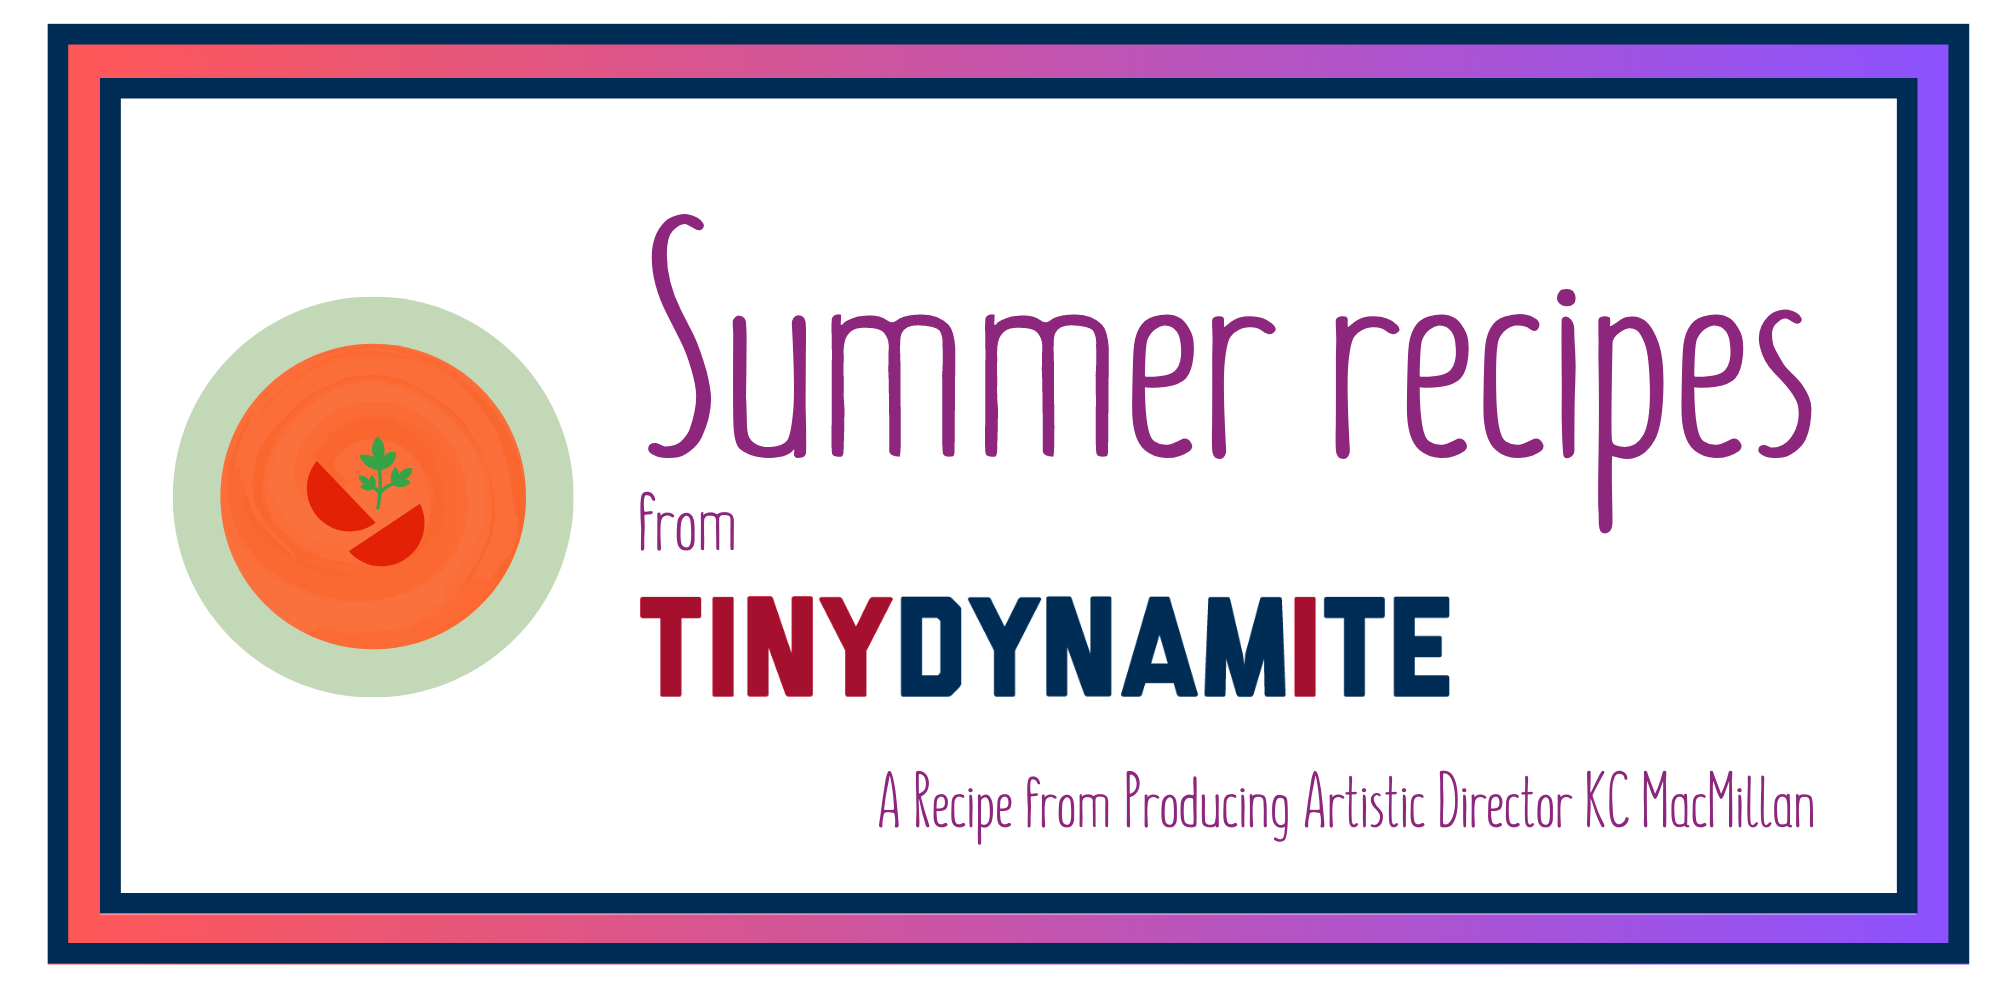 A picture of gazpacho and the text "Summer recipes from Tiny Dynamite